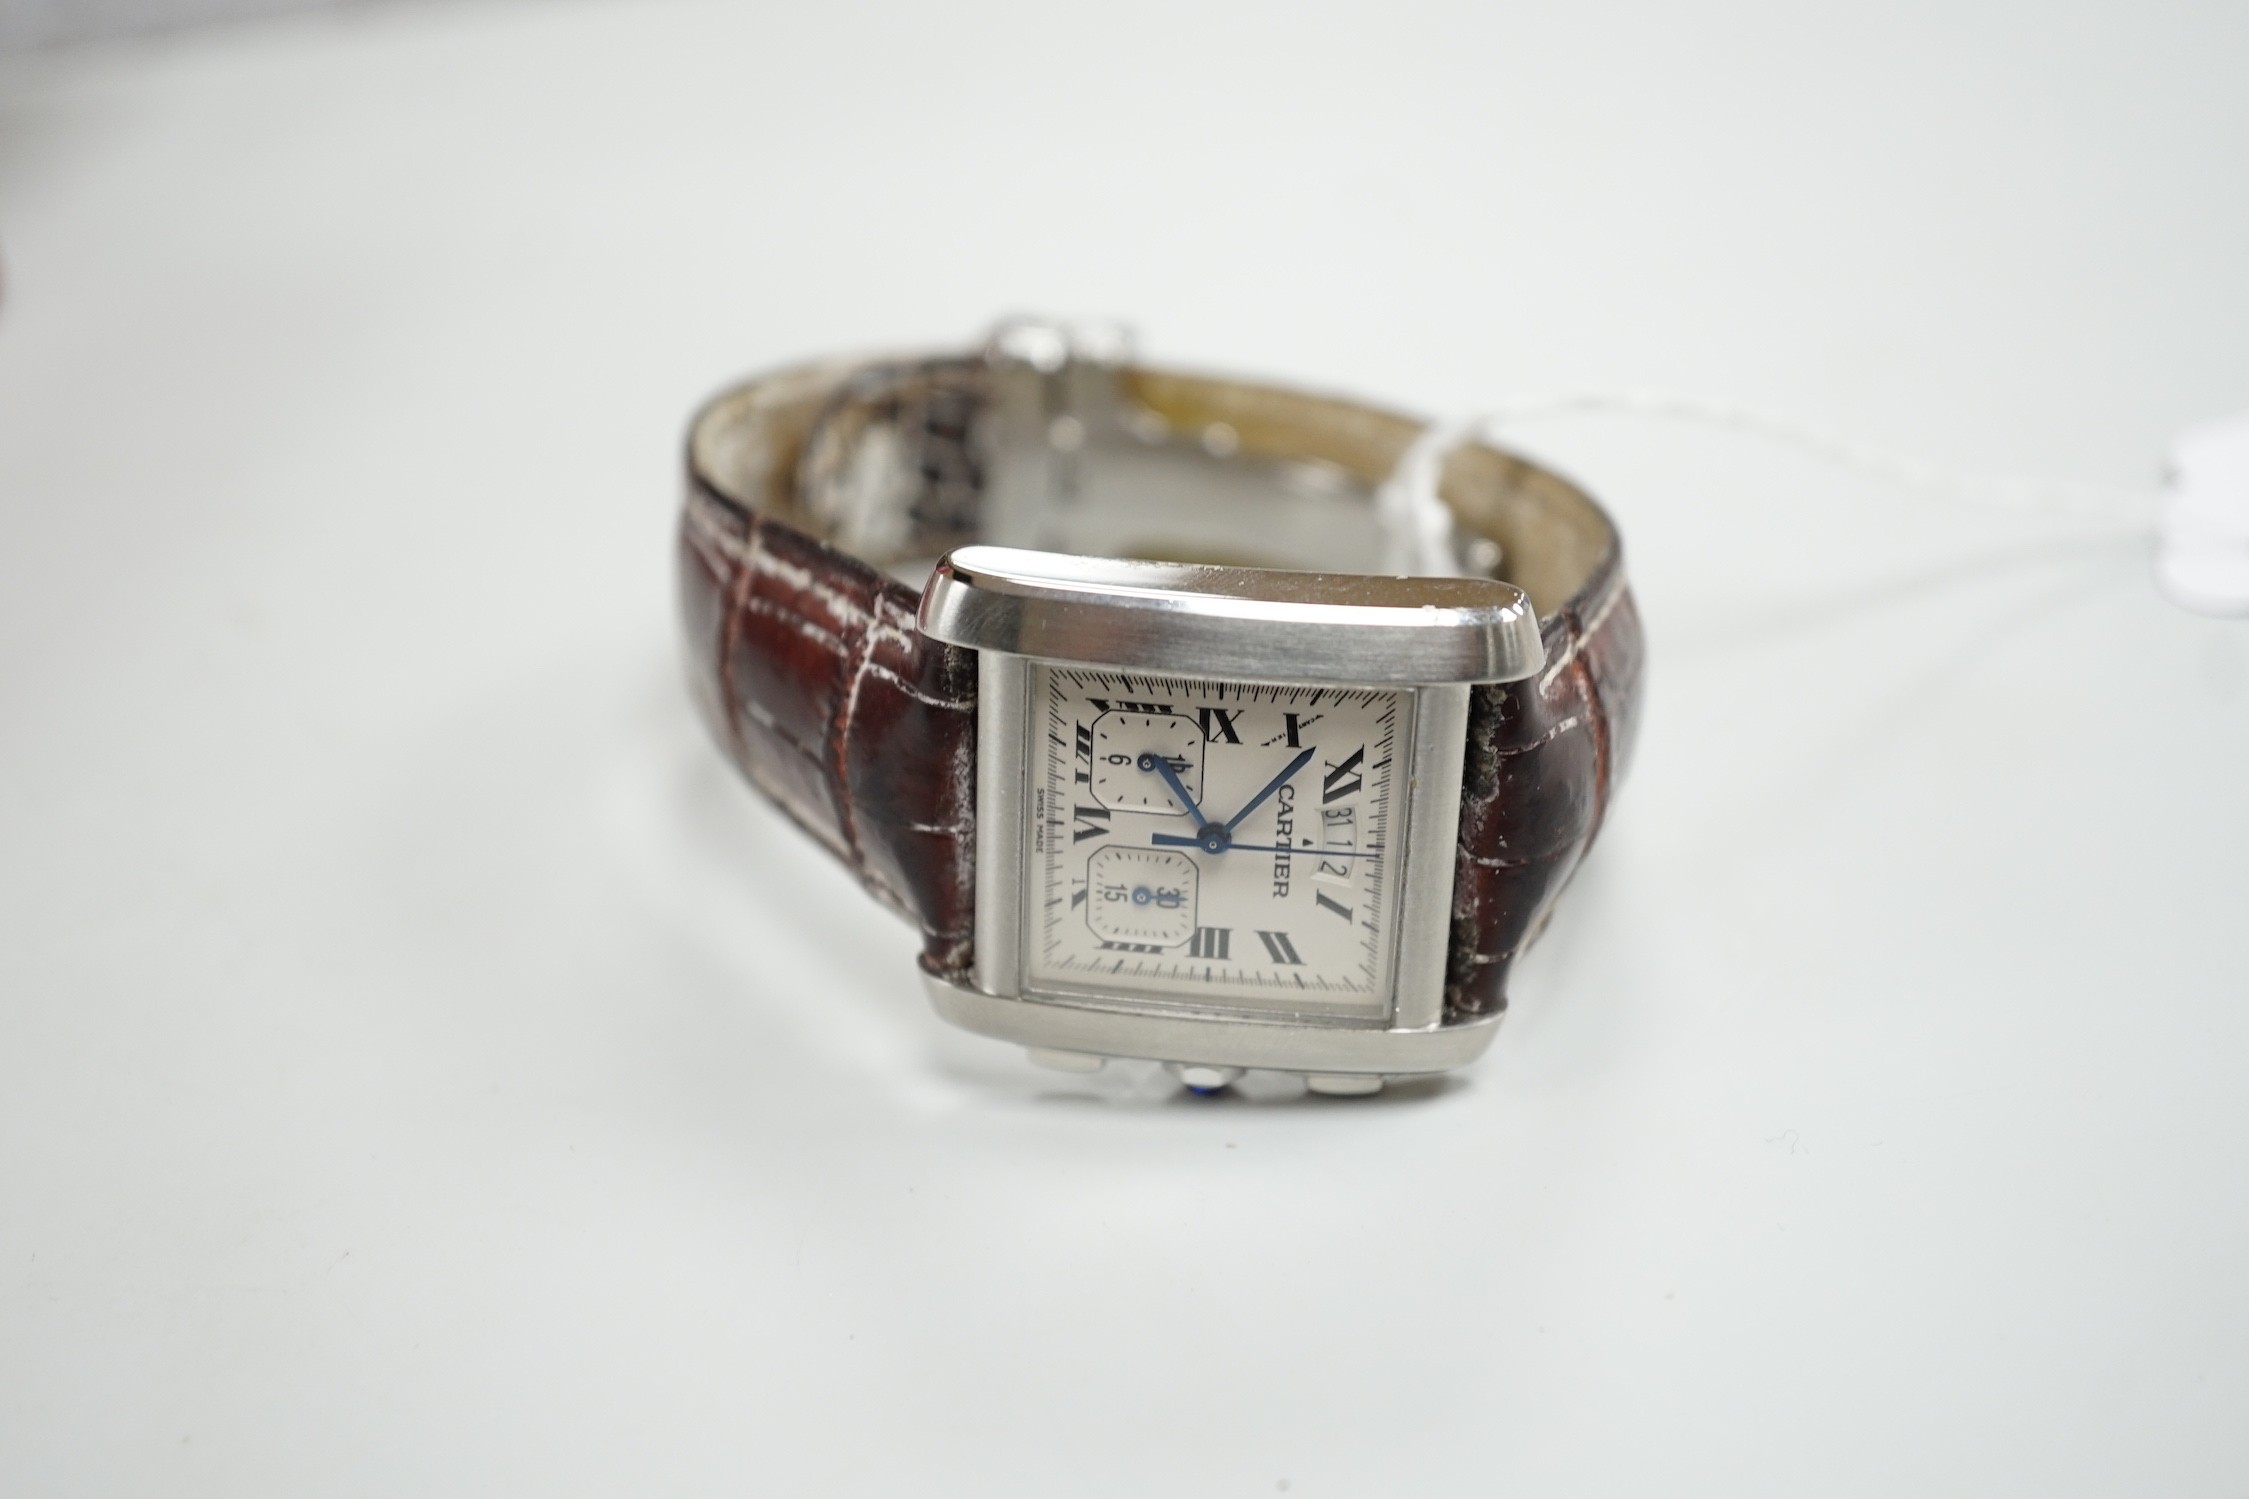 A gentleman's 2006 stainless steel Cartier Tank Francaise quartz wrist watch, with Roman numerals and two subsidiary dials, case diameter 30mm, with original Cartier box and booklets.